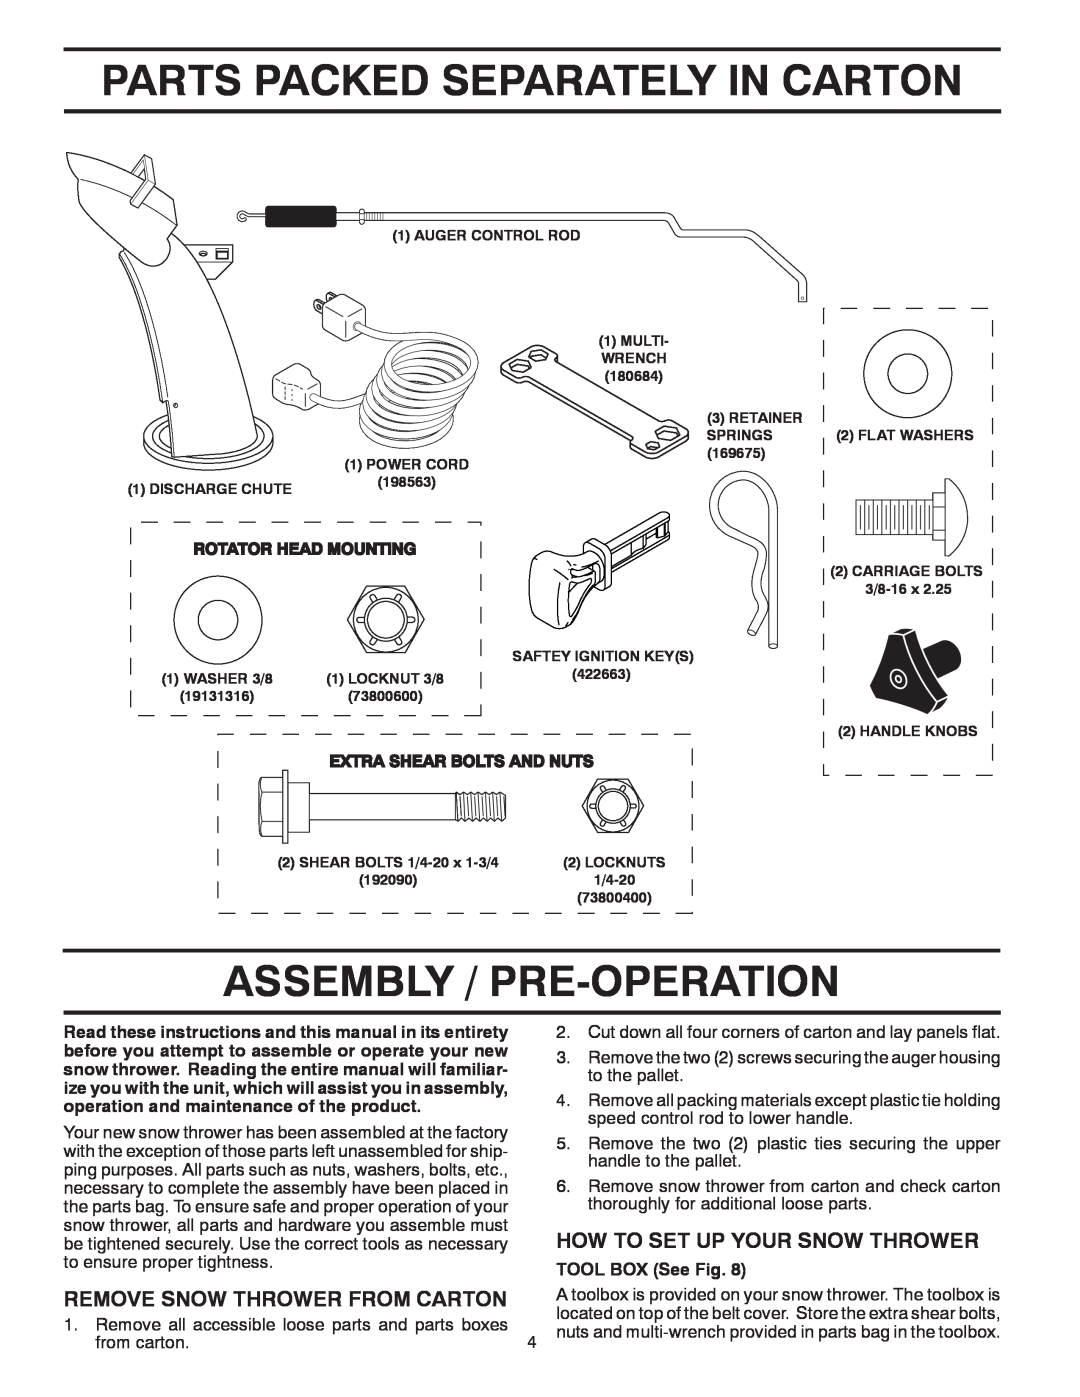 Poulan 437920, 96192004501 Parts Packed Separately In Carton, Assembly / Pre-Operation, How To Set Up Your Snow Thrower 